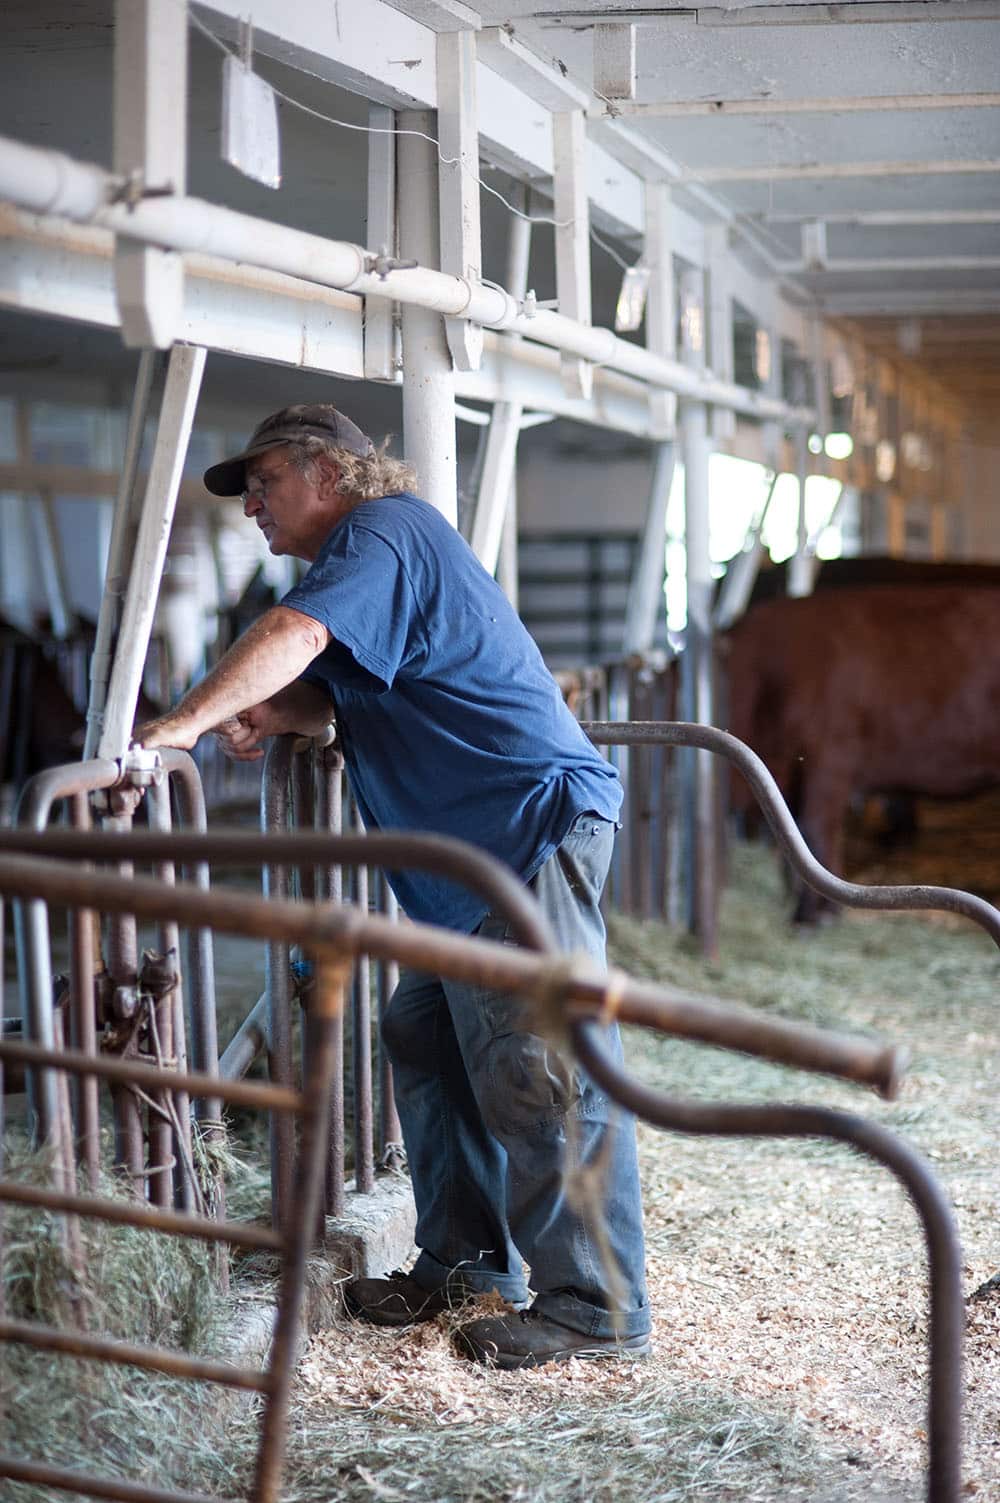 Bruce Balch surveys his herd of Devon cattle in the barn at Bunten Farm in Orford, New Hampshire.